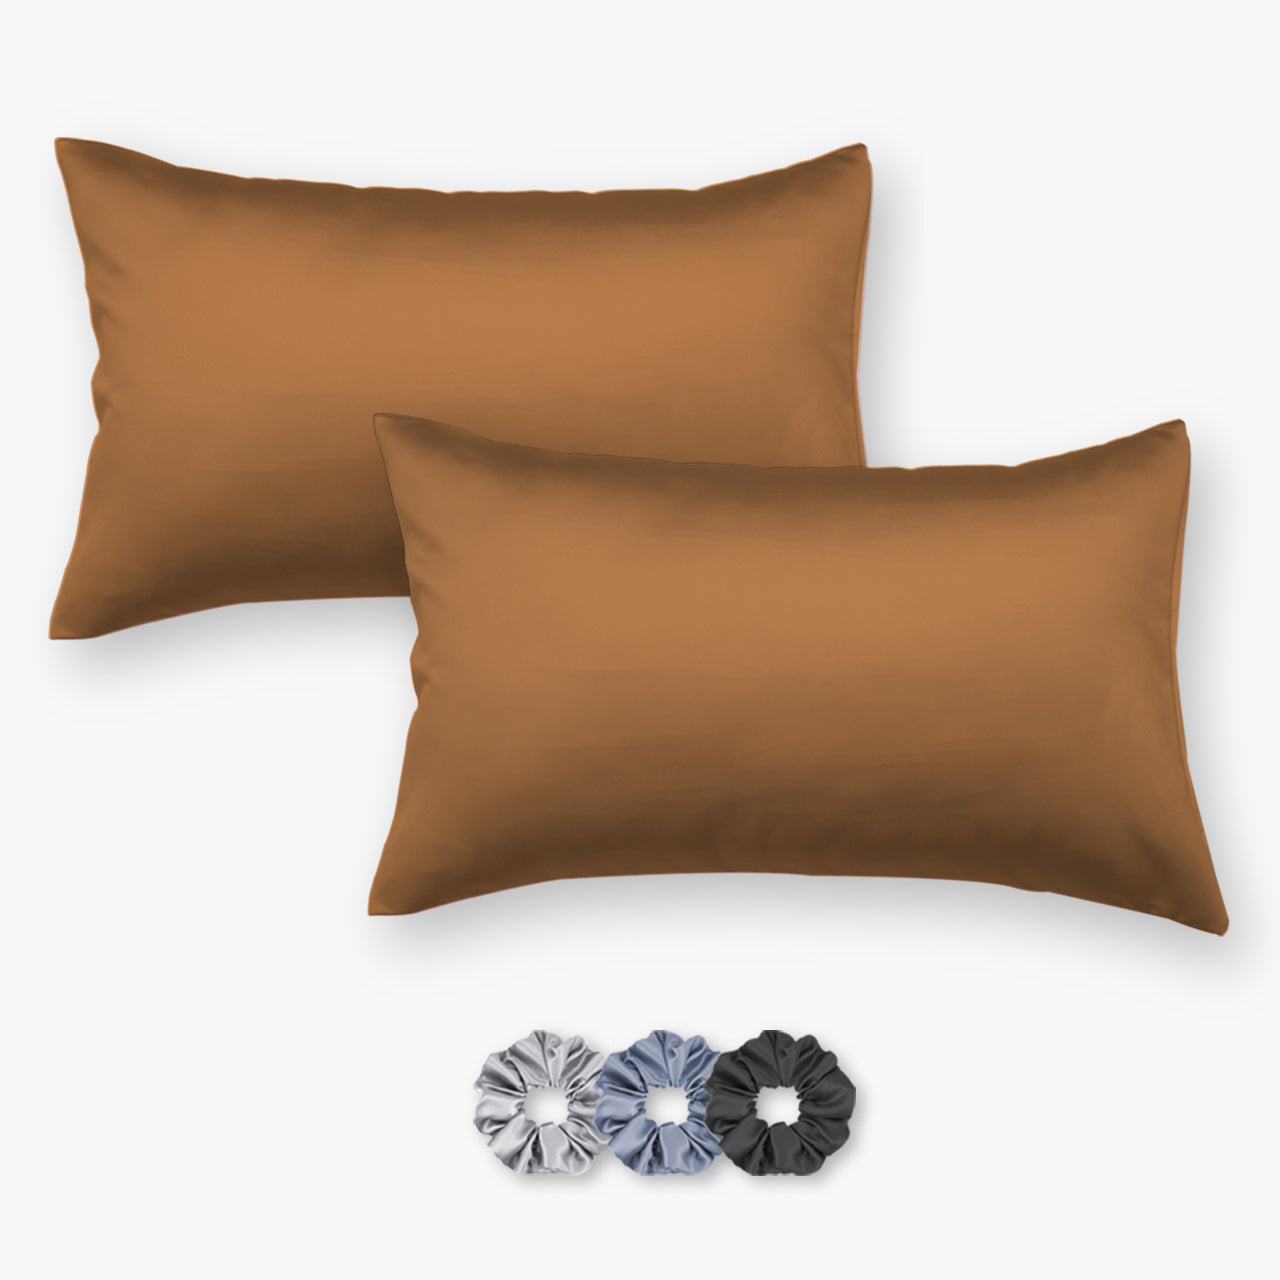 Brown Mocha Satin Pillow Covers - Set of 2 (With 3 Free Scrunchies)